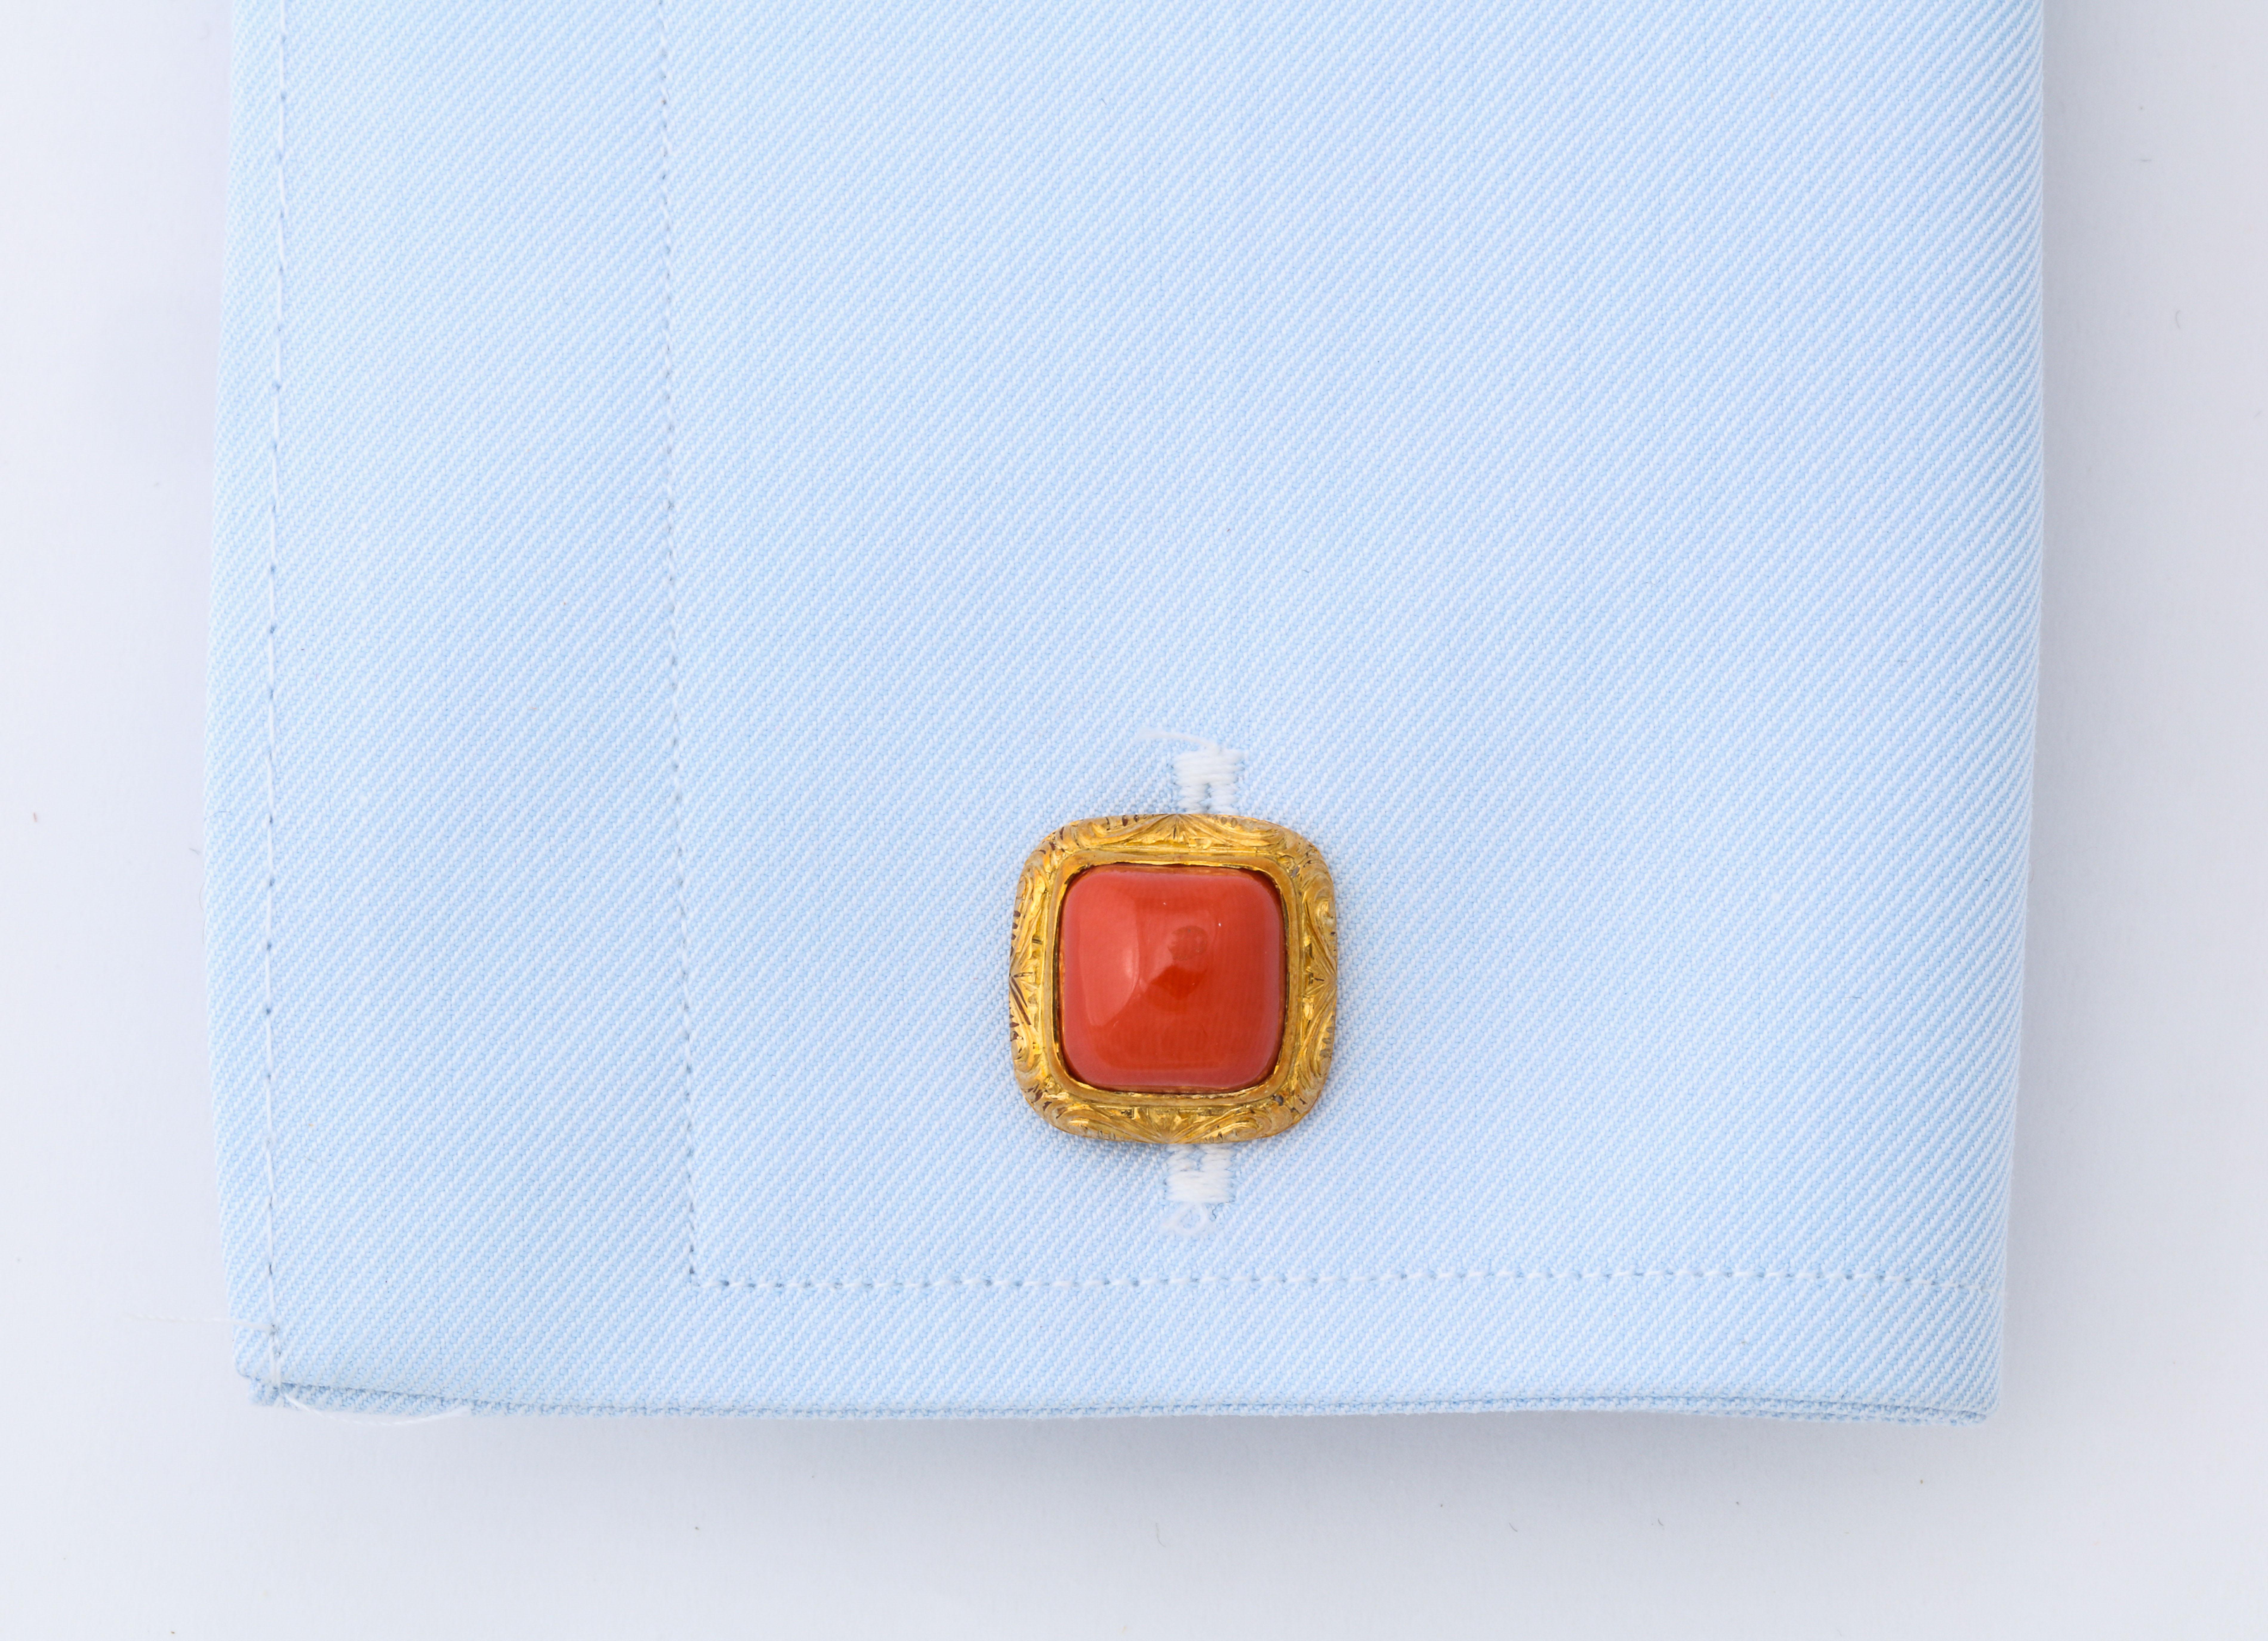 Very fine hand engraved gold cufflinks featuring four perfectly matched pieces of Sardinian coral.  Double sided cufflinks are always a sign of true luxury and the work of a talented hand engraver makes all the difference.  Made in Italy.